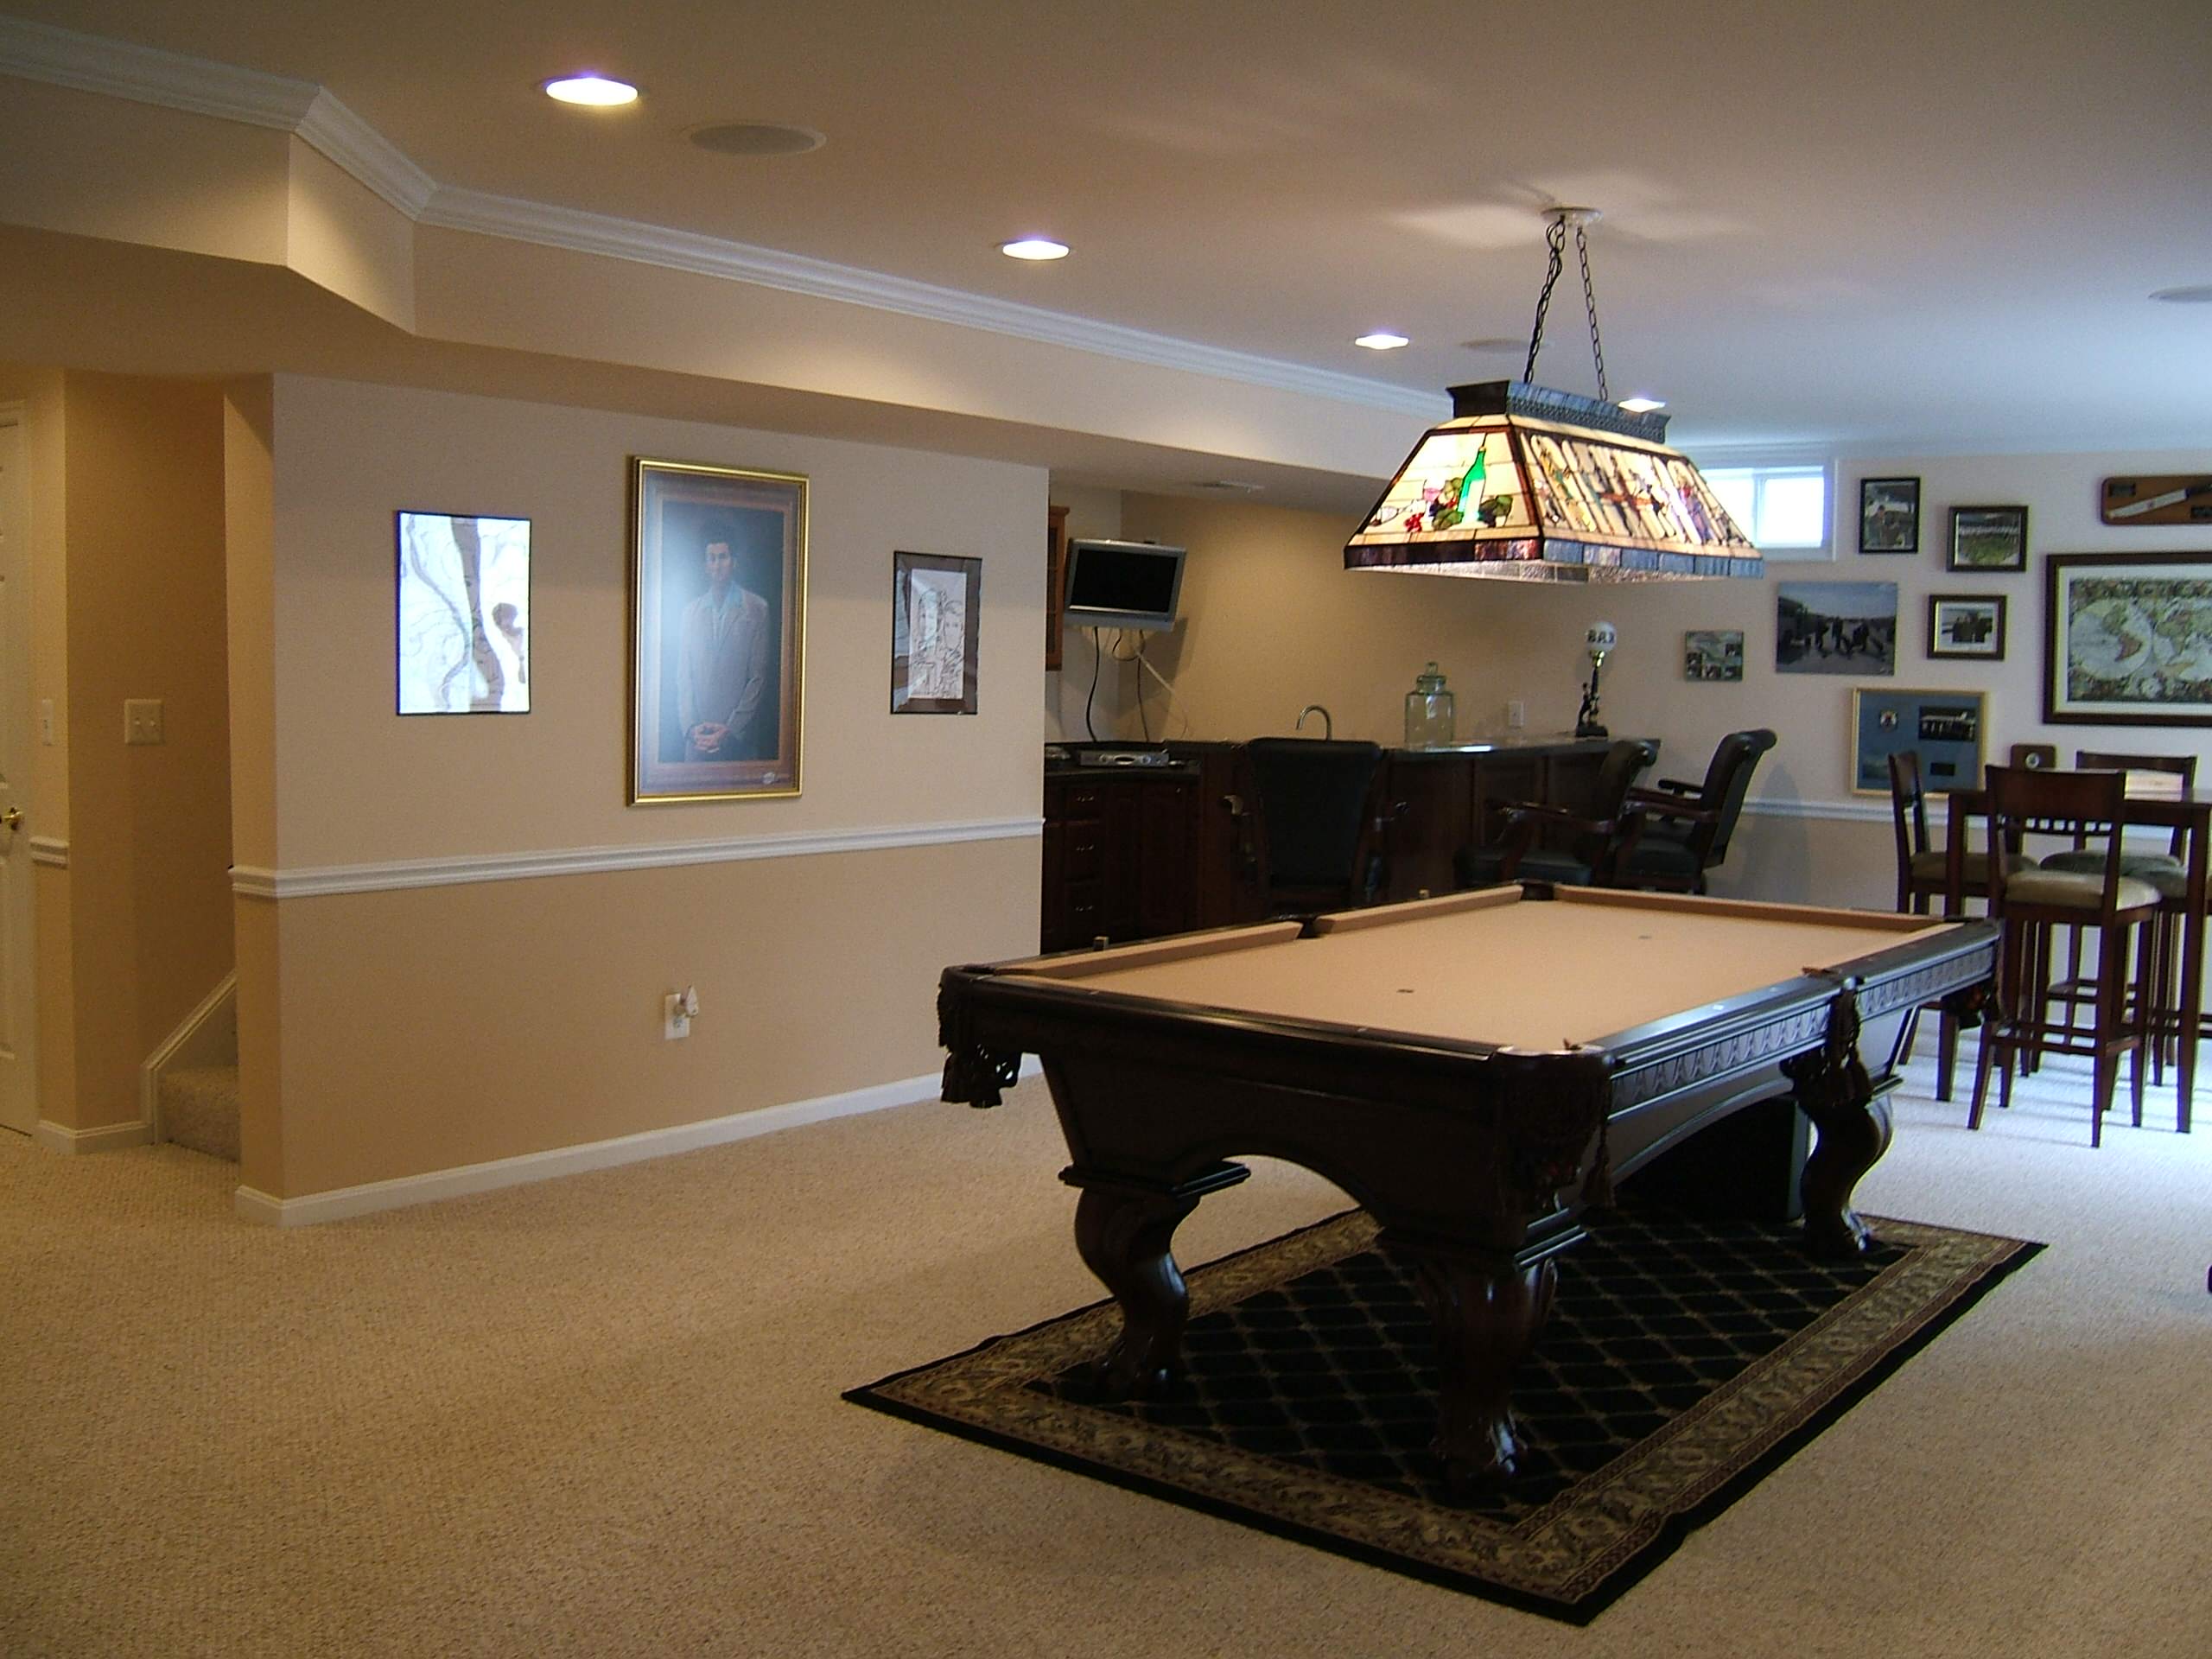 Rug Under Pool Table Houzz, Pool Table Rugs